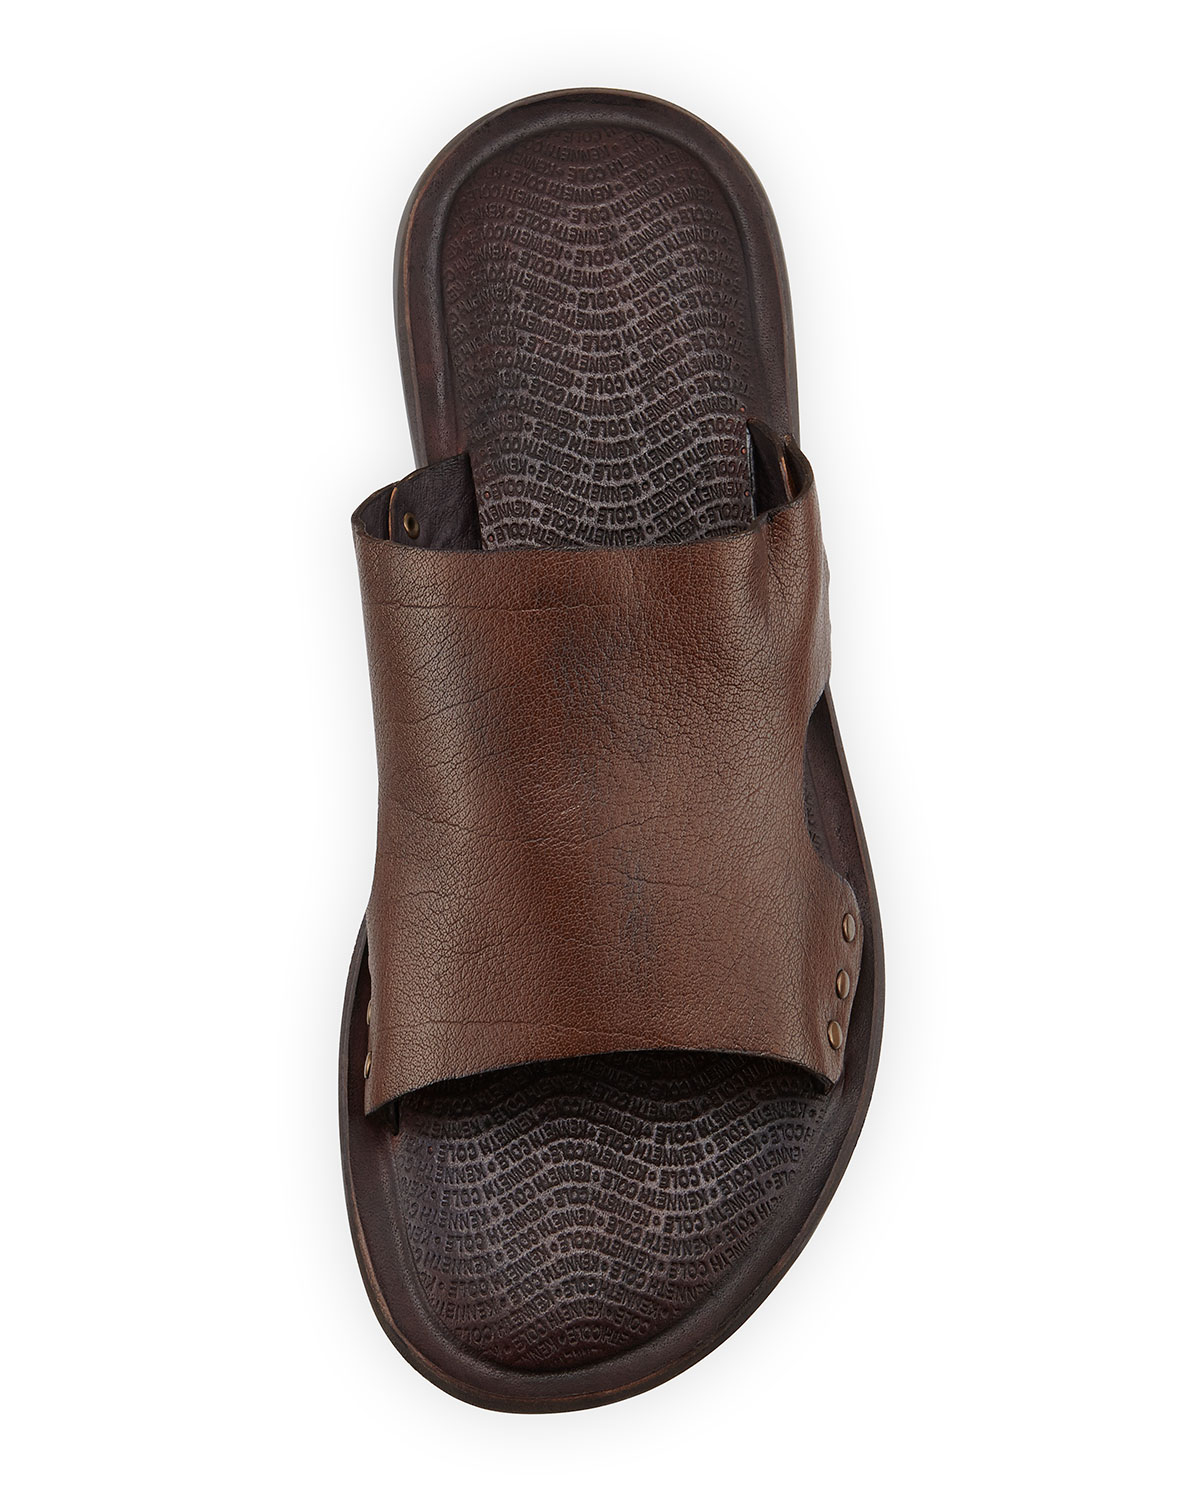 Kenneth Cole Afinity Leather Slide  Sandal  in Tan Brown 